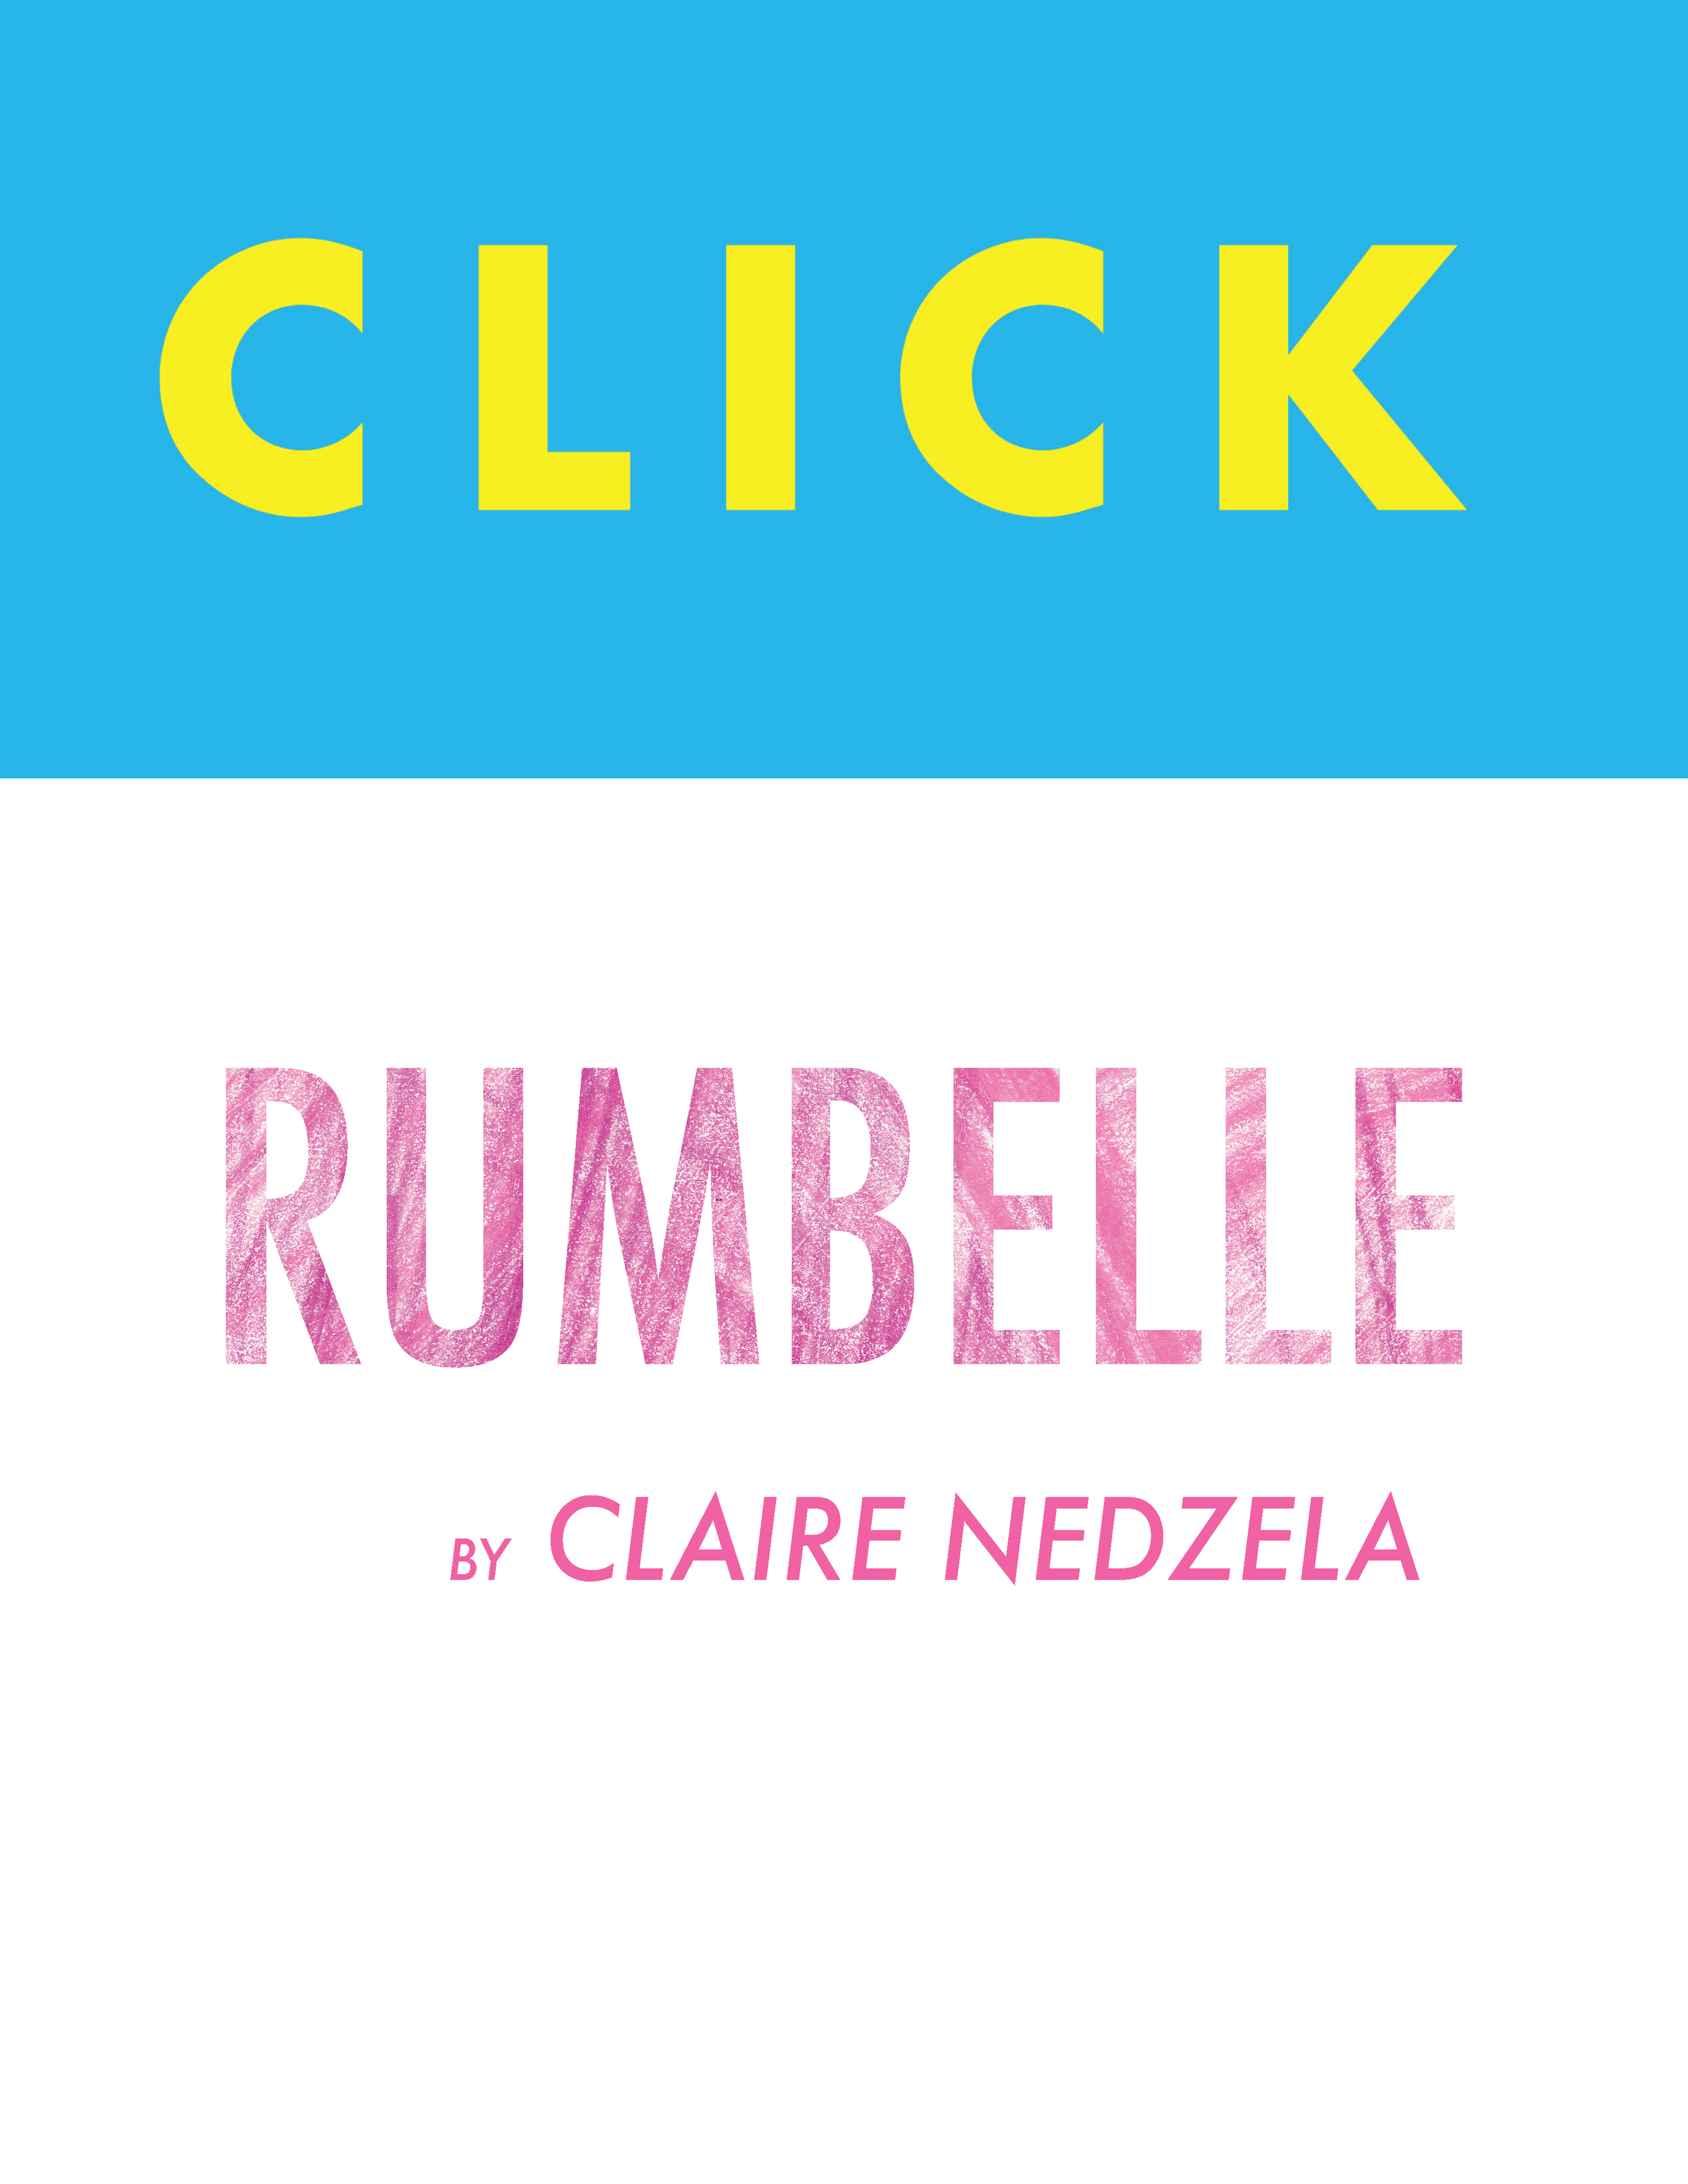 Claire Nedzela CLICK _Page_1.png